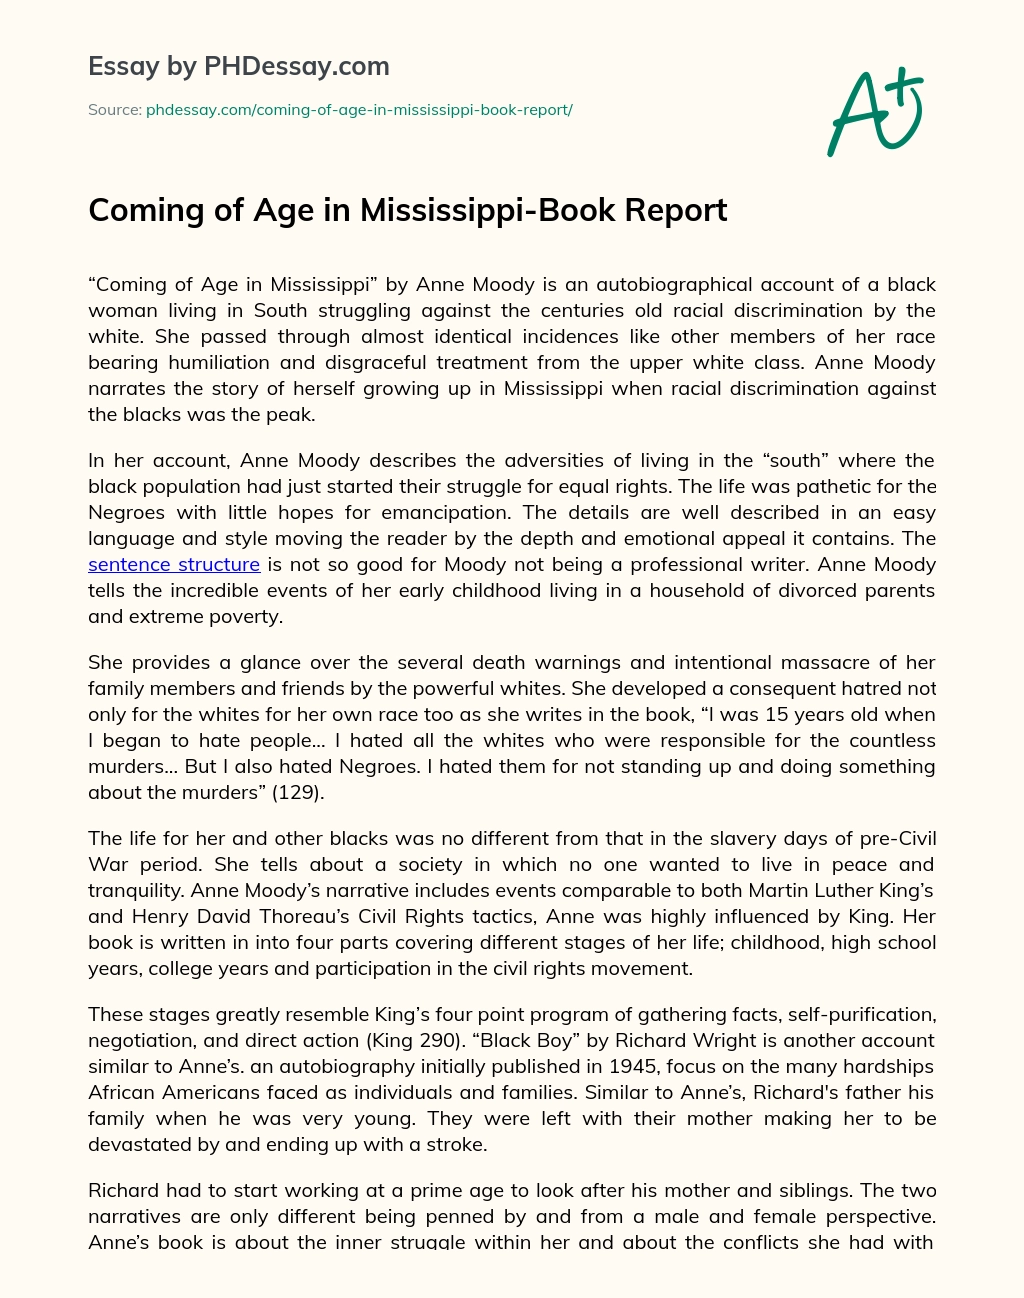 coming of age in mississippi book review essay